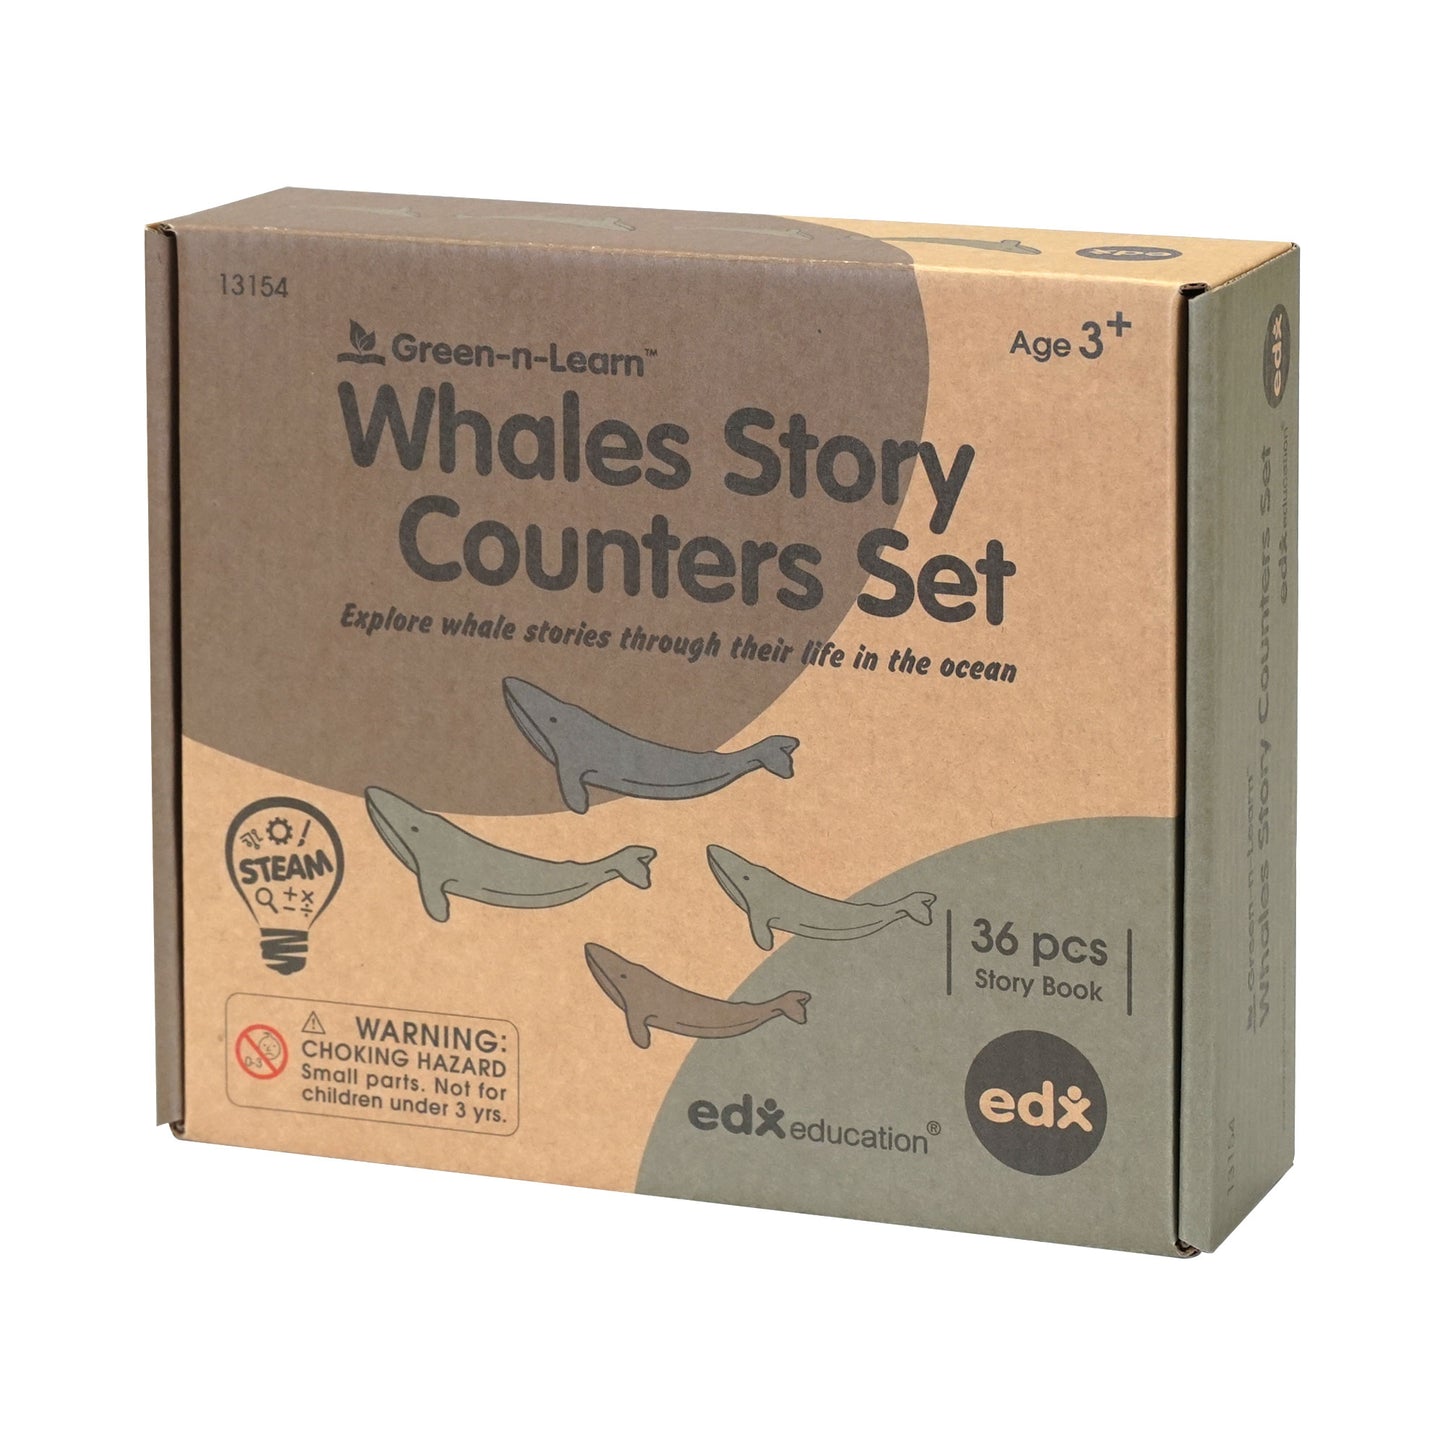 Green-n-Learn® Whales Story Counters Set - Shopedx